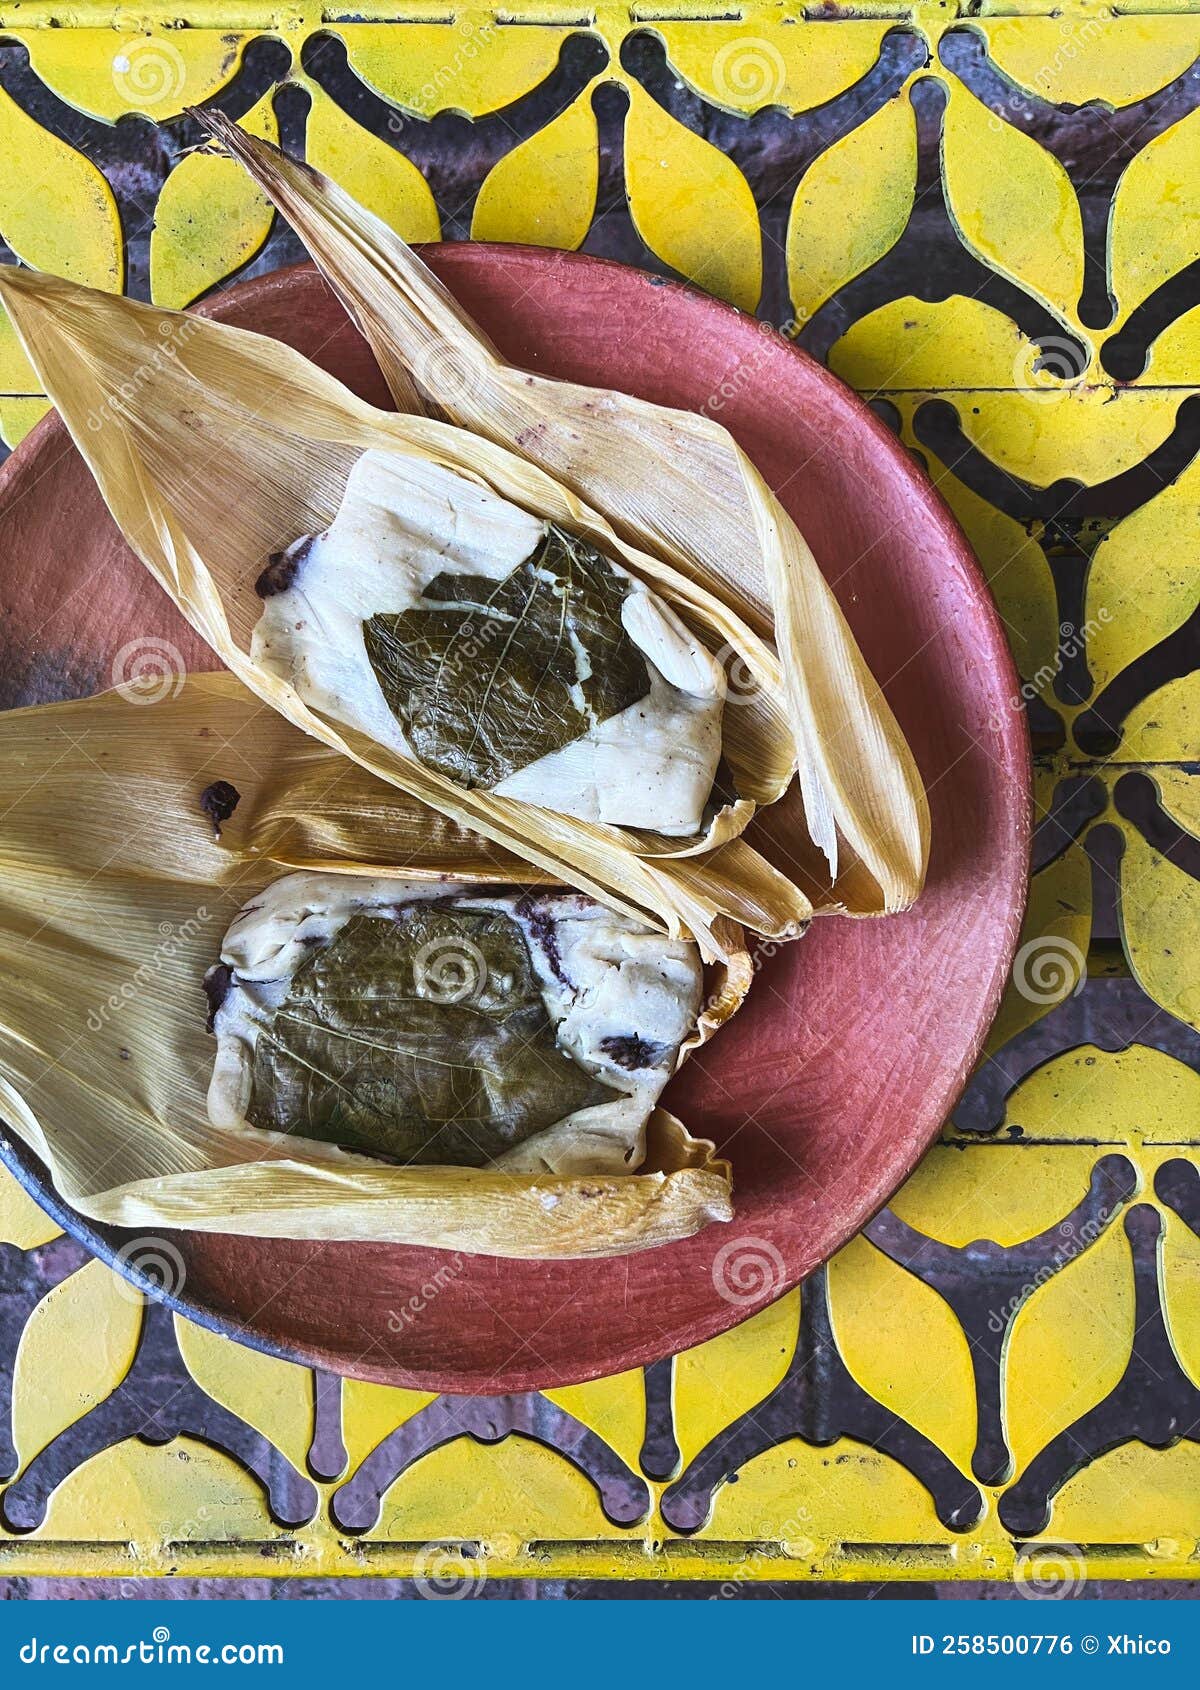 oaxacan tamales with hoja santa wrapped on the outside of the masa